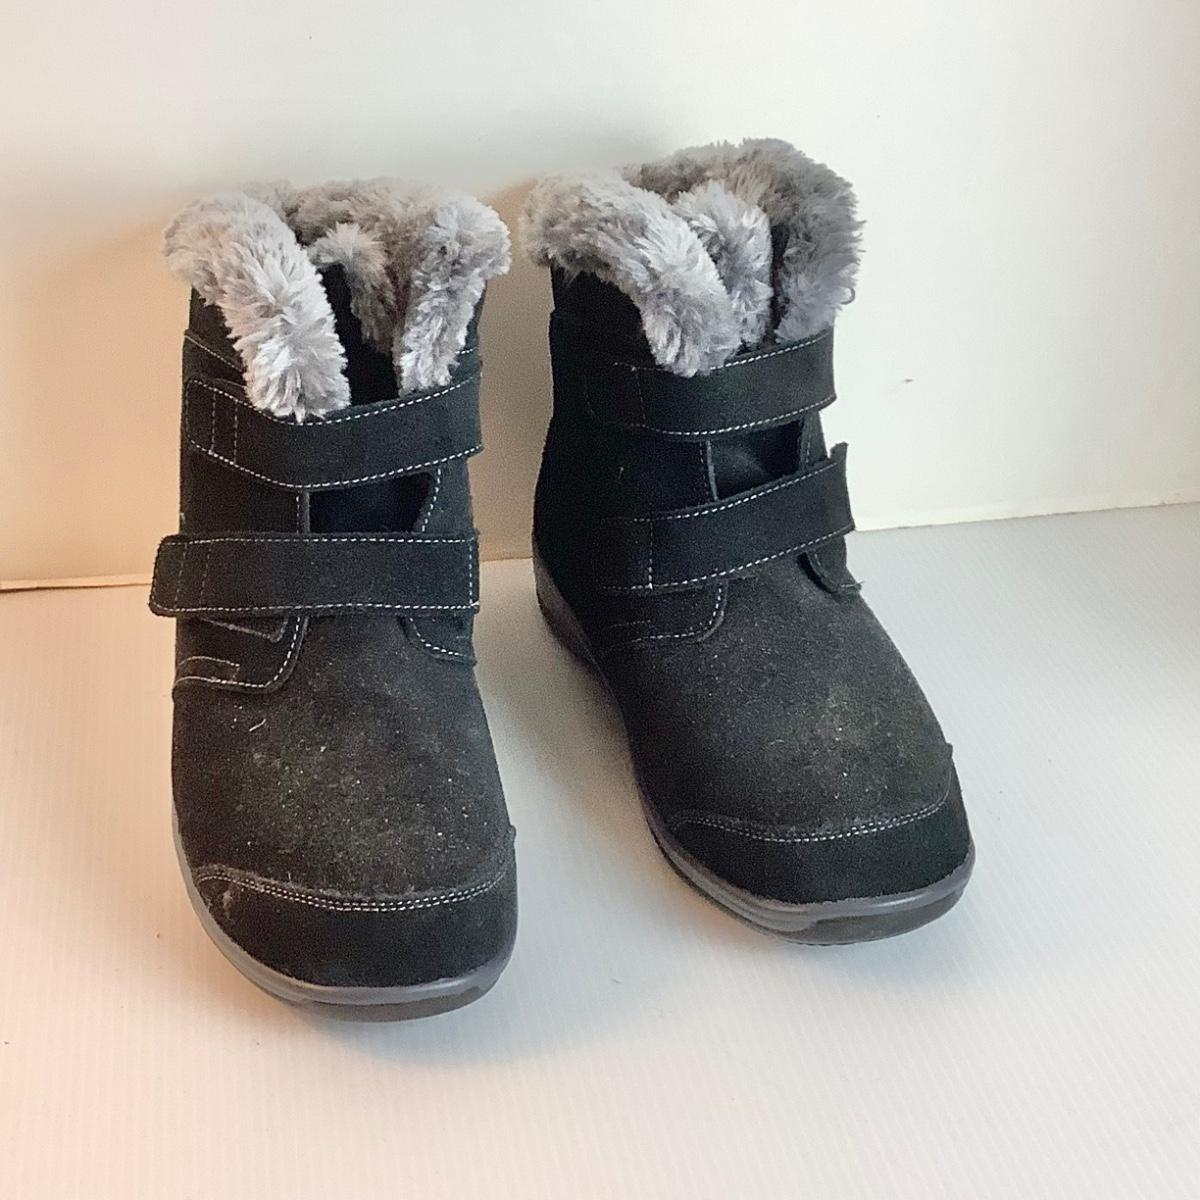 Lot 1052 Ortho Feet Boots ( IN NEW CONDITION ) Size 8.5 | EstateSales.org